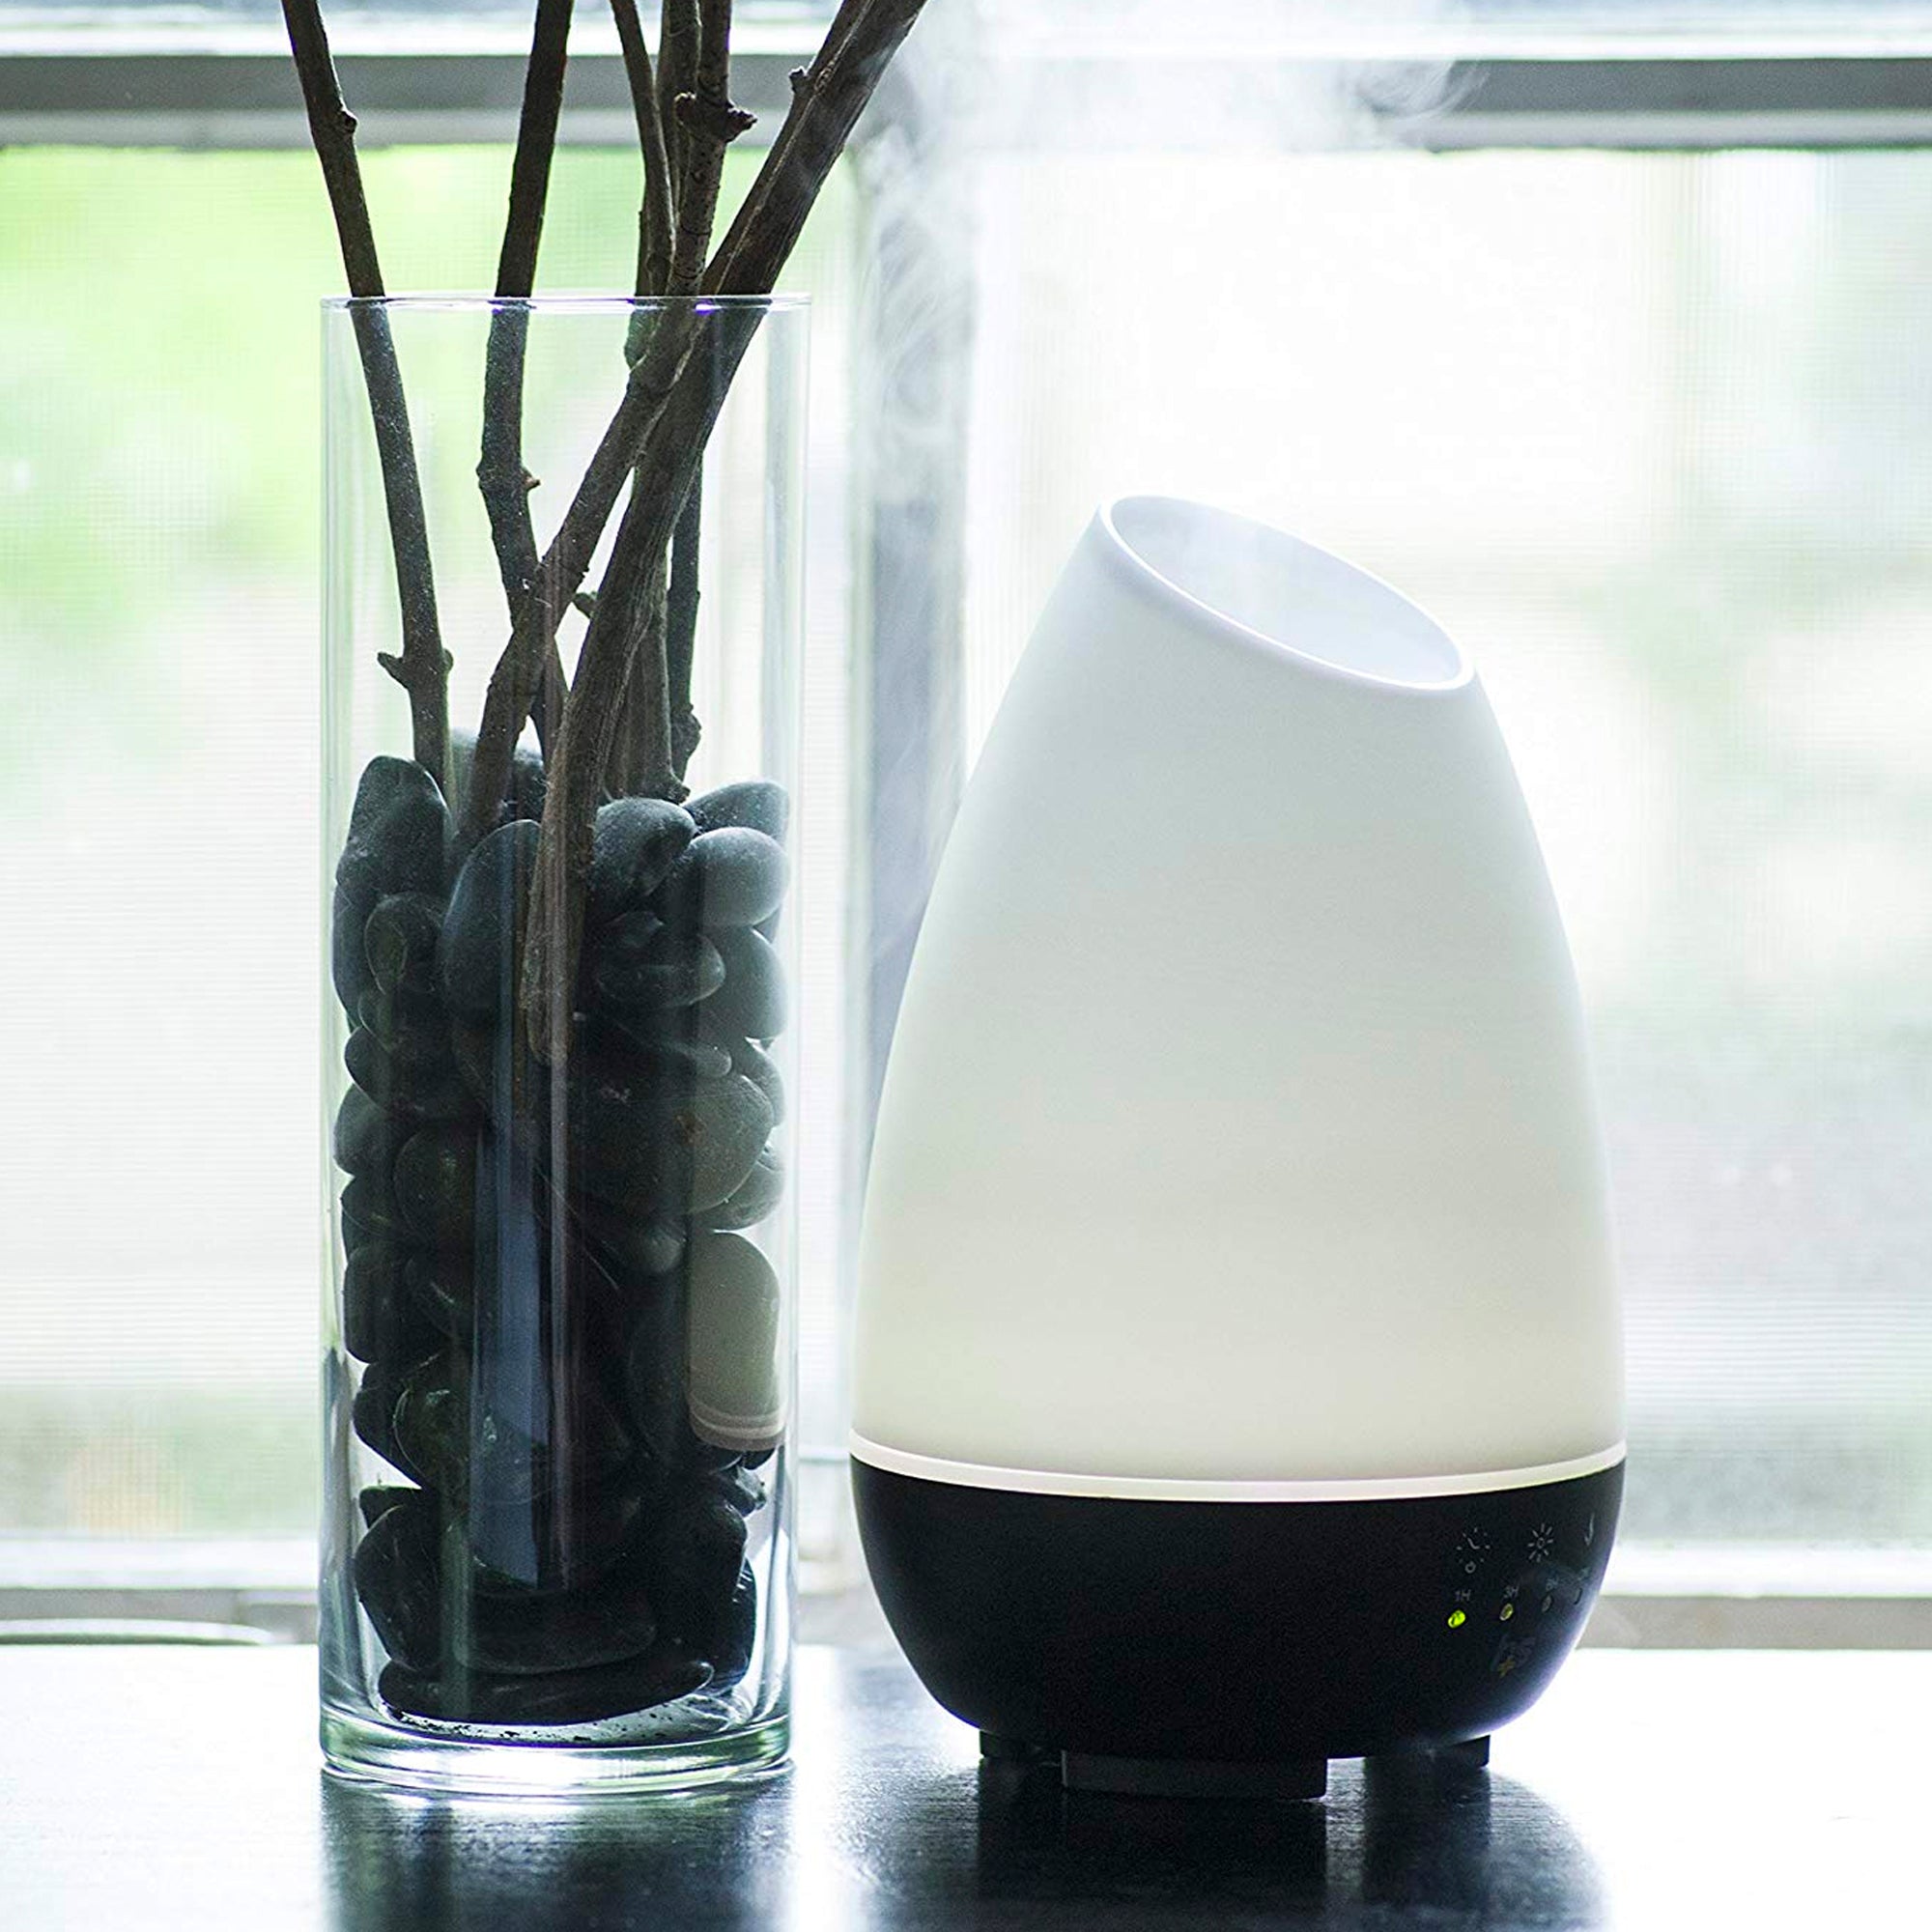 HealthSmart Aromatherapy Diffuser Cool Mist Humidifier - Oil Diffuser for Essential Oils, White AM-40-500-190